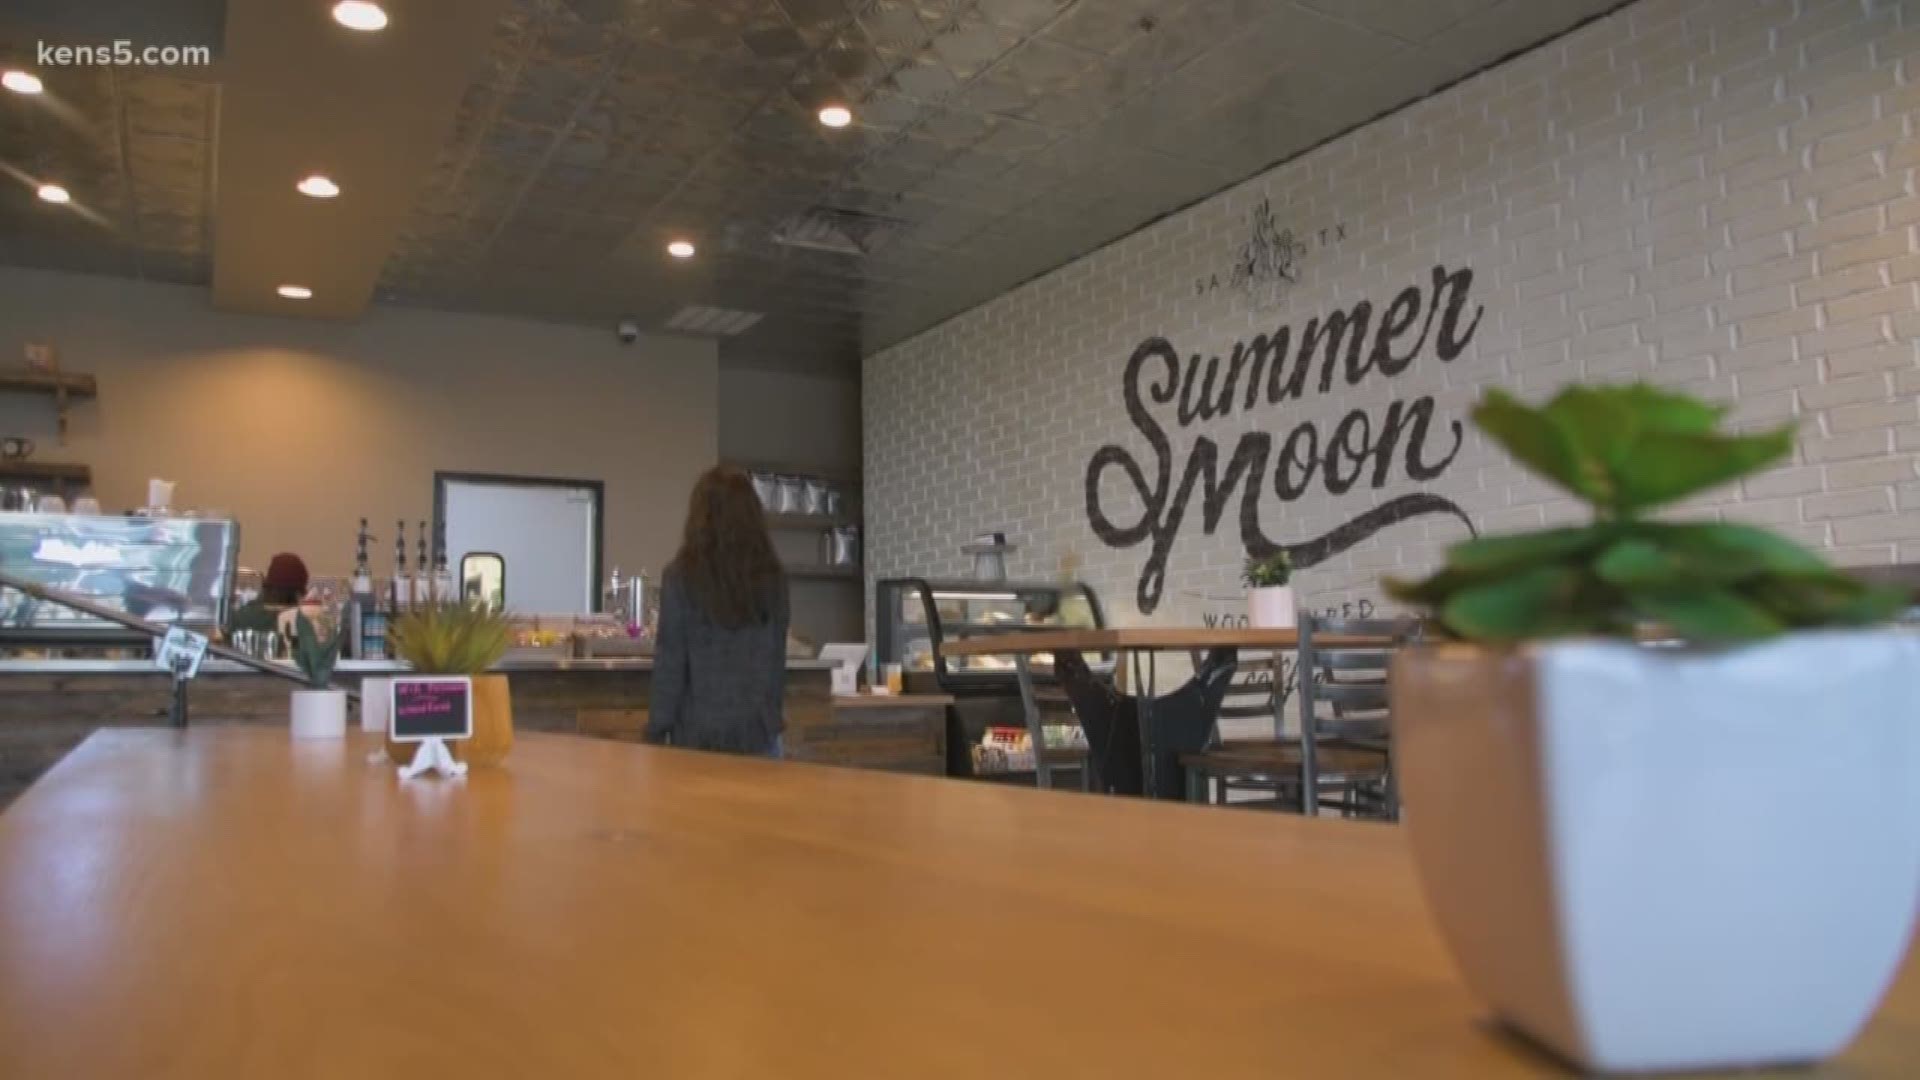 Whether you brew up yourself or rely on someone else, there are a lot of coffee shop choices around. But, one of those spots is becoming more popular in San Antonio.